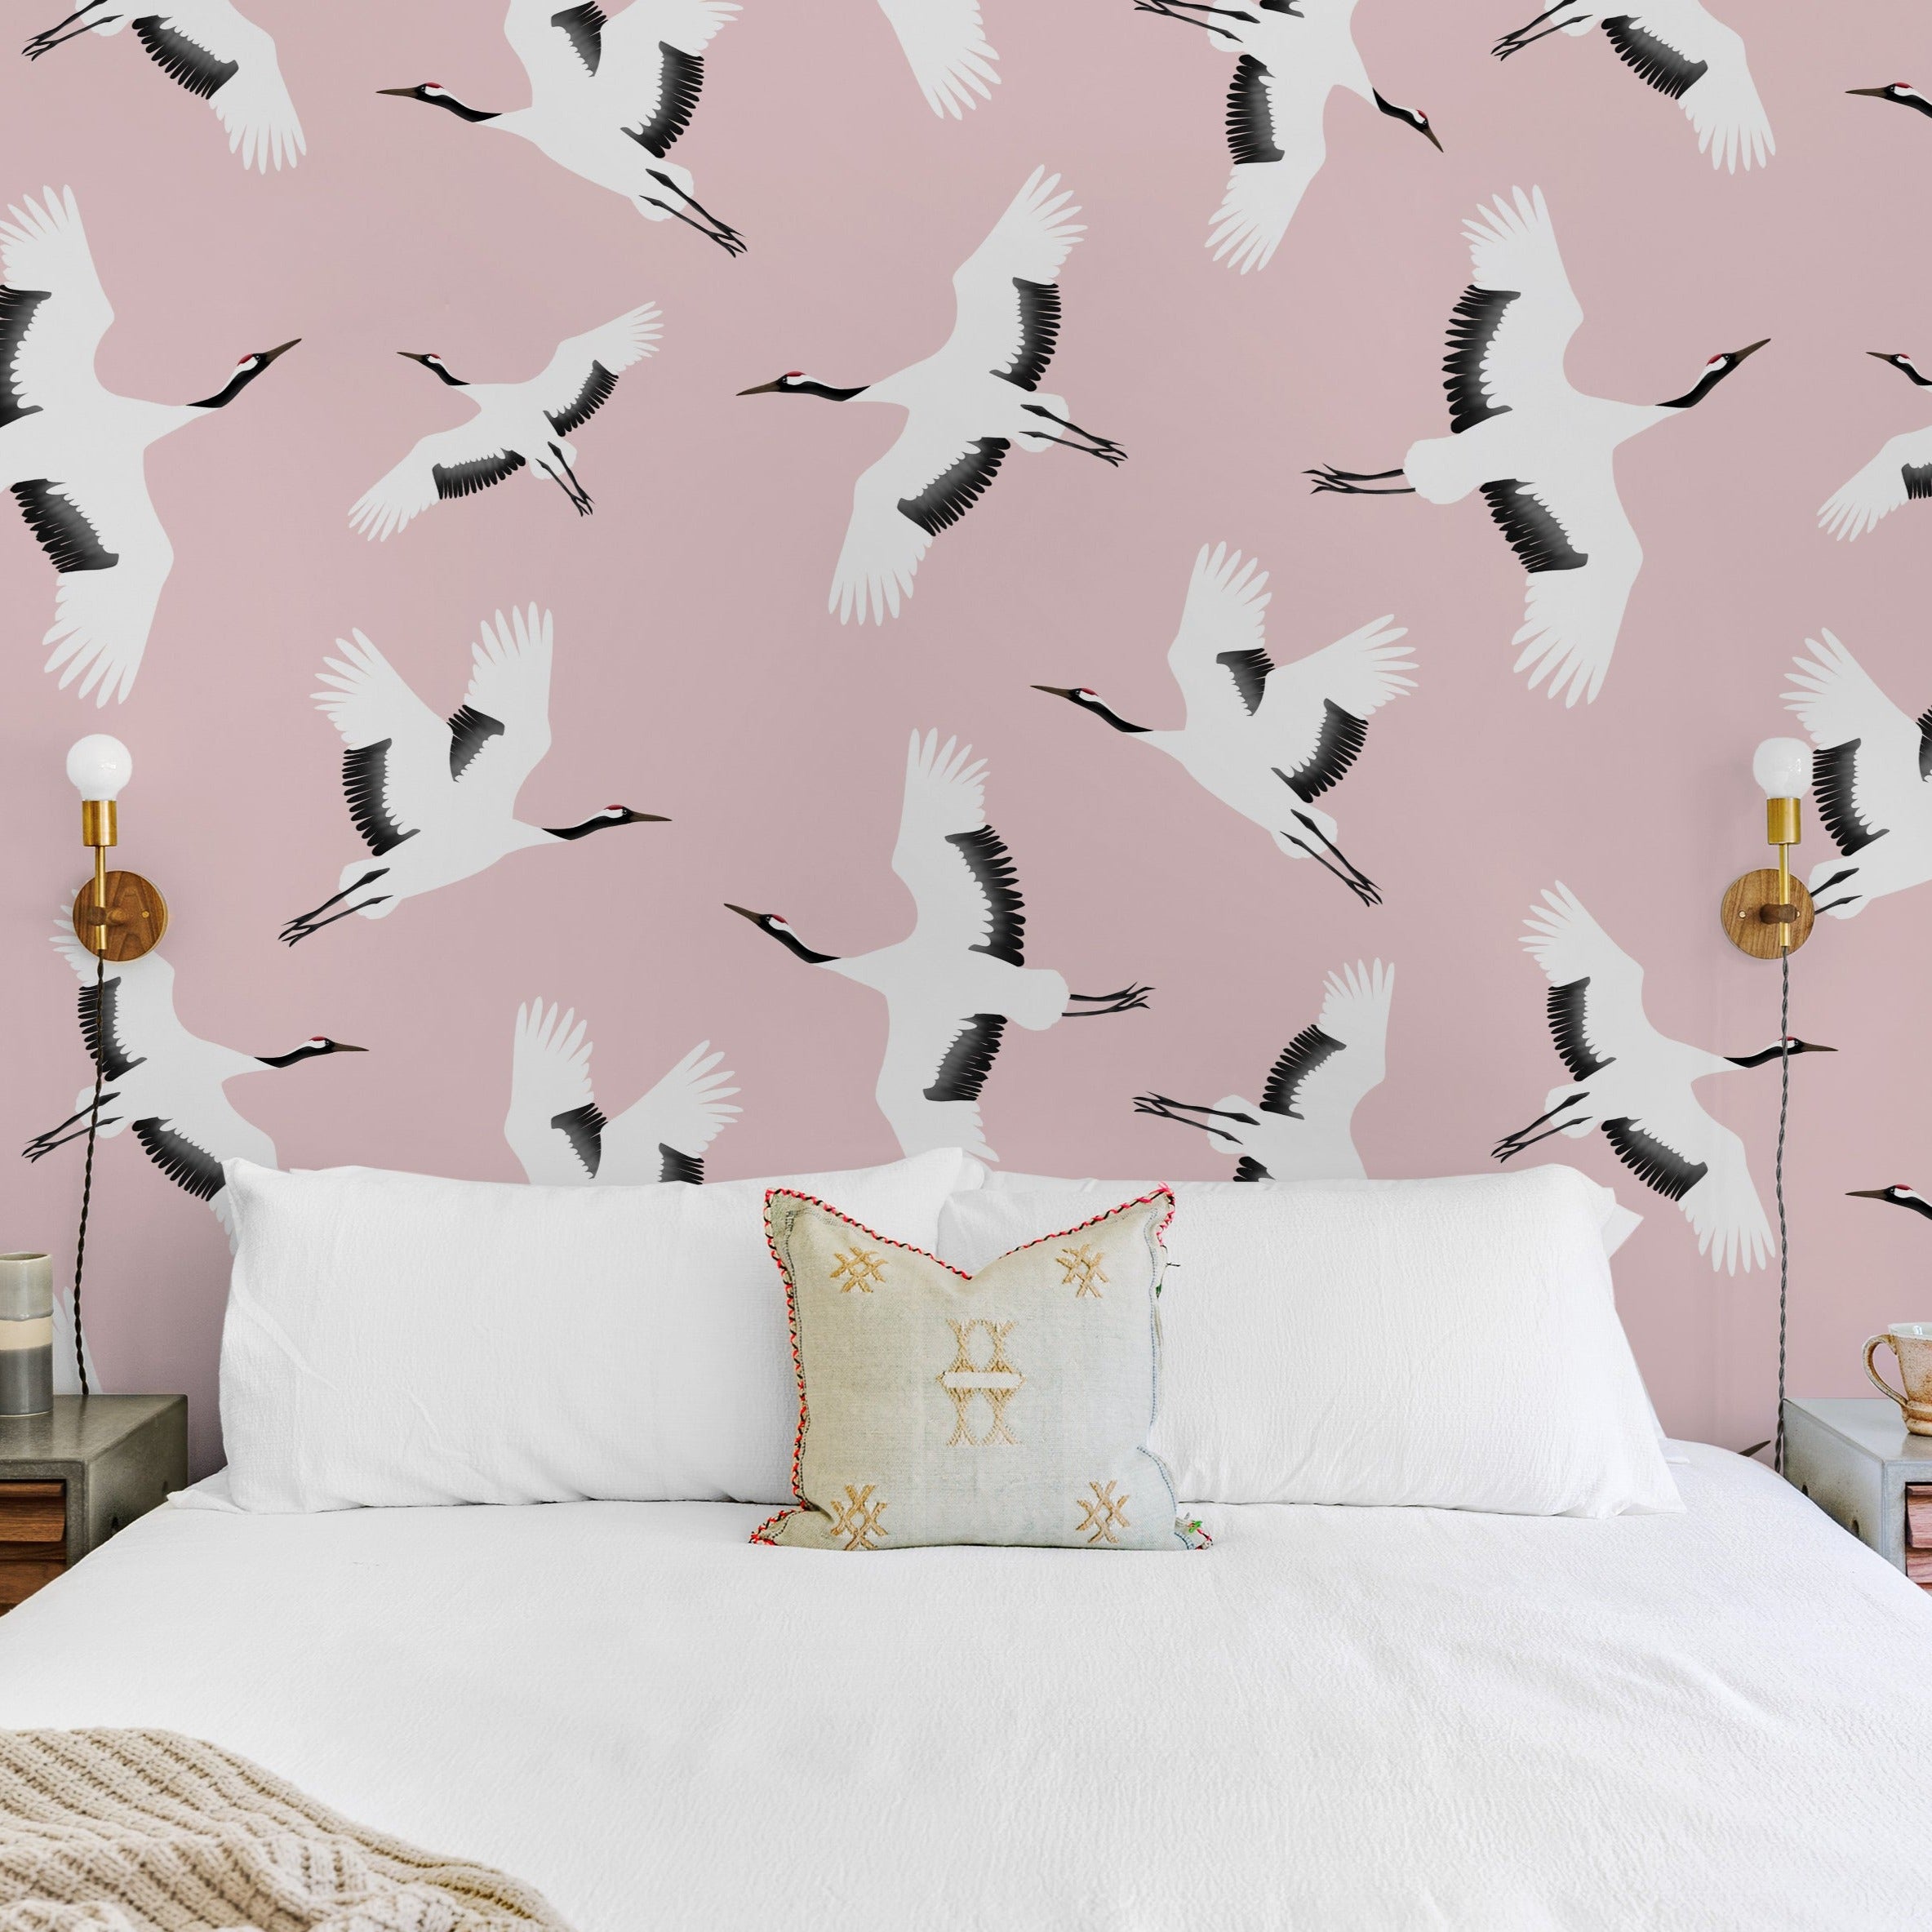 A stylish bedroom showcasing the 'Kids Crane Wallpaper,' with its delicate depiction of white cranes flying over a blush pink background, complementing a modern and serene decor style